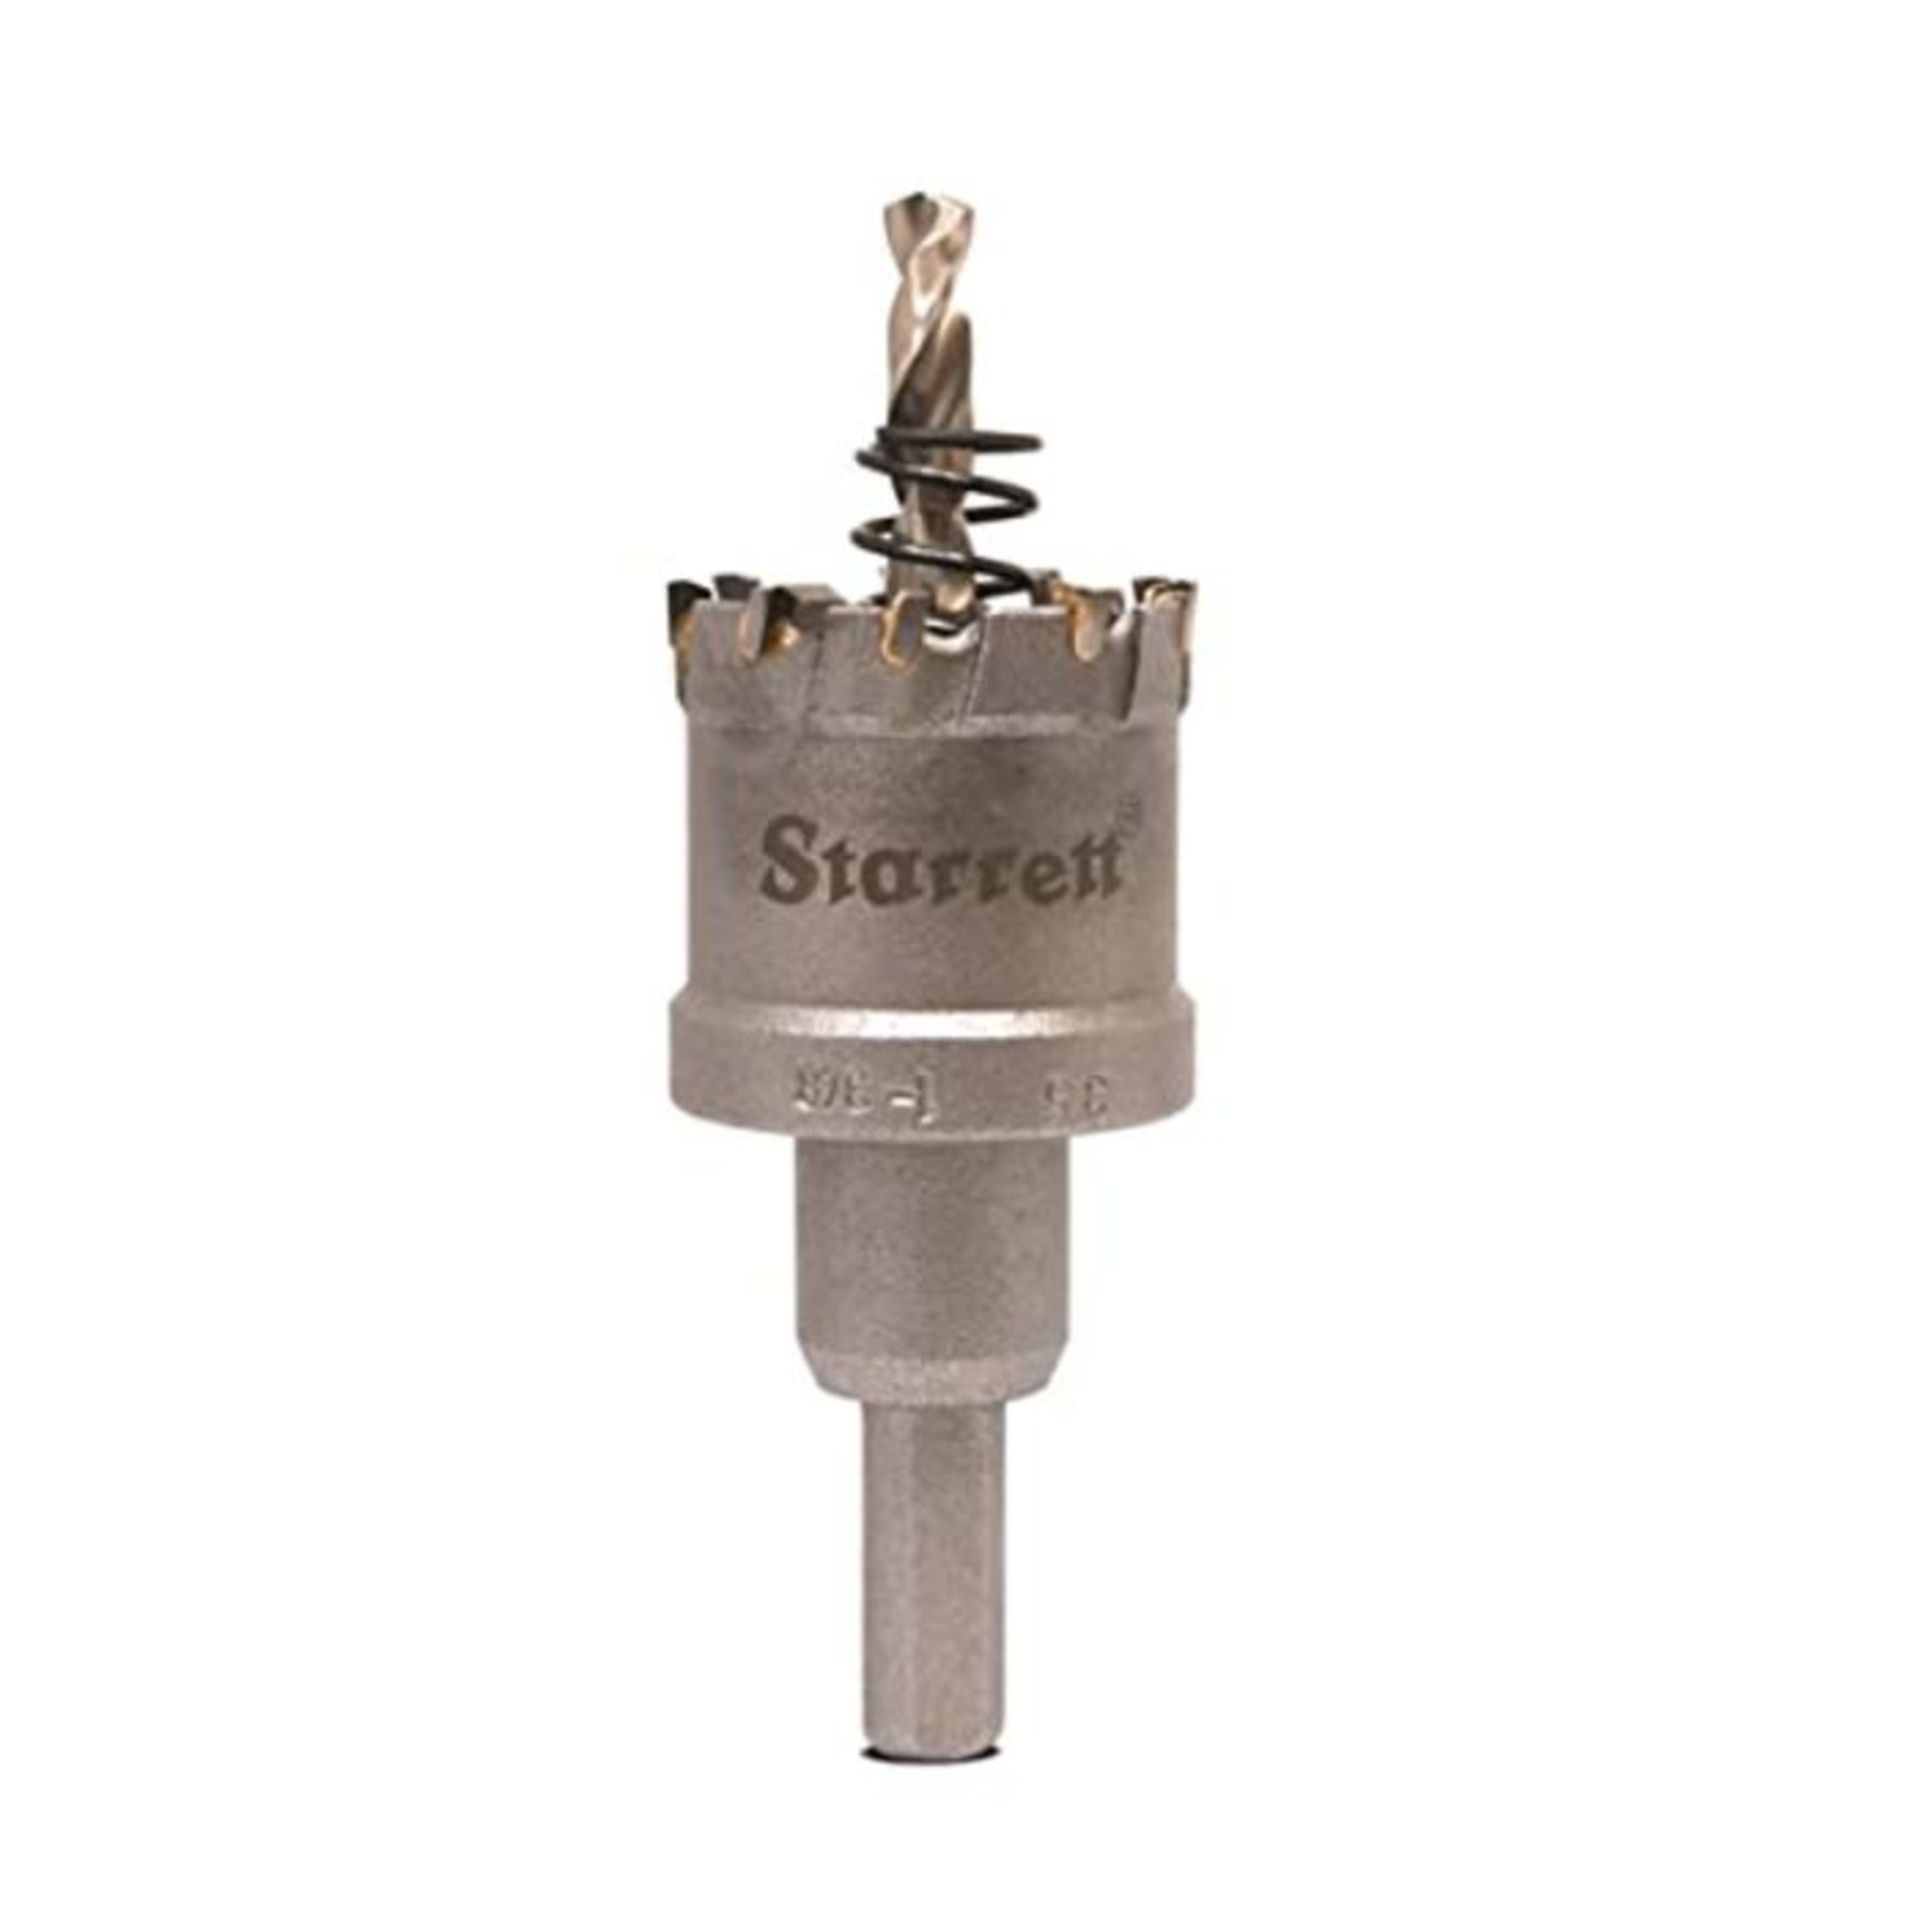 Starrett Carbide Tipped Hole Saw - CTD35 TCT Deep Cut Holesaw Cutter - For Metal Stain